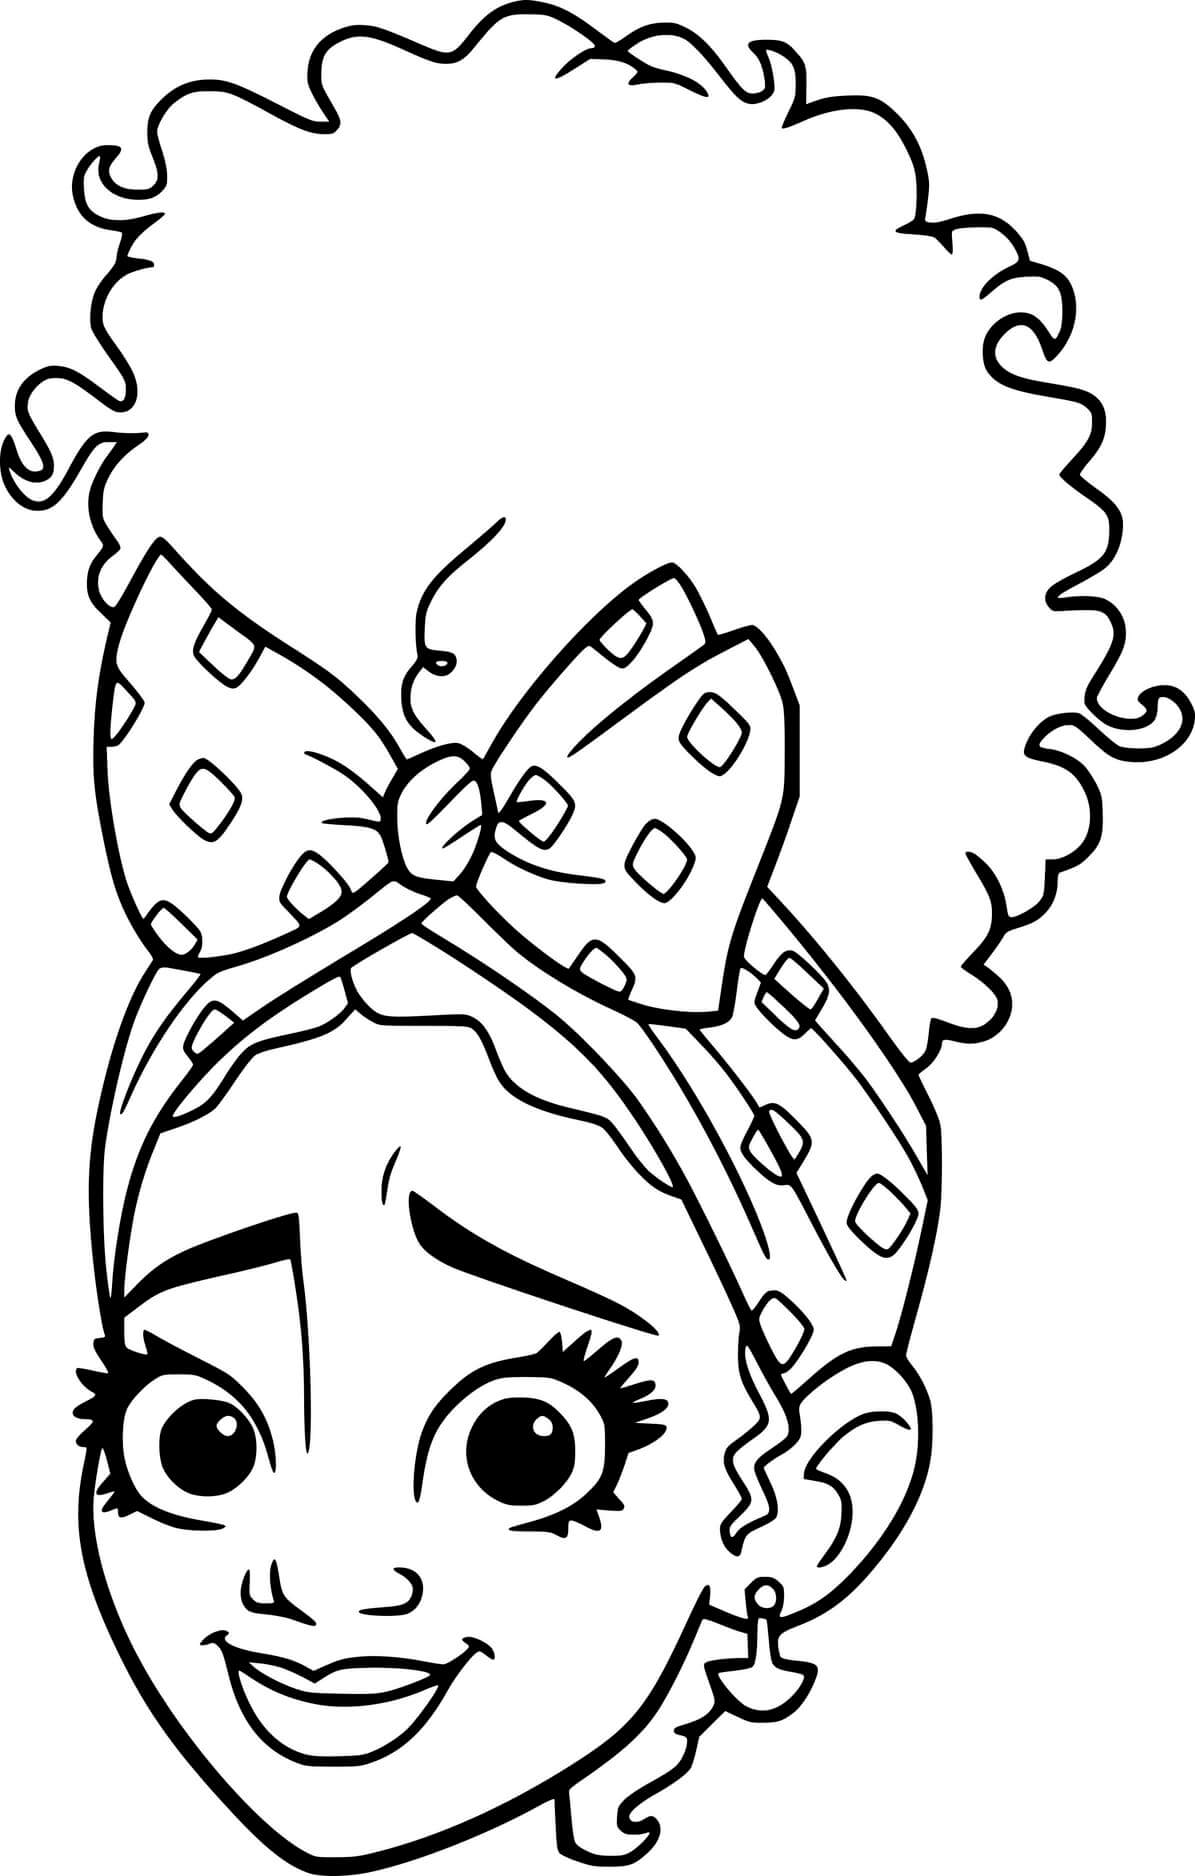 roblox para colorir 25  Coloring pages for girls, Coloring pages for kids,  Free printable coloring pages